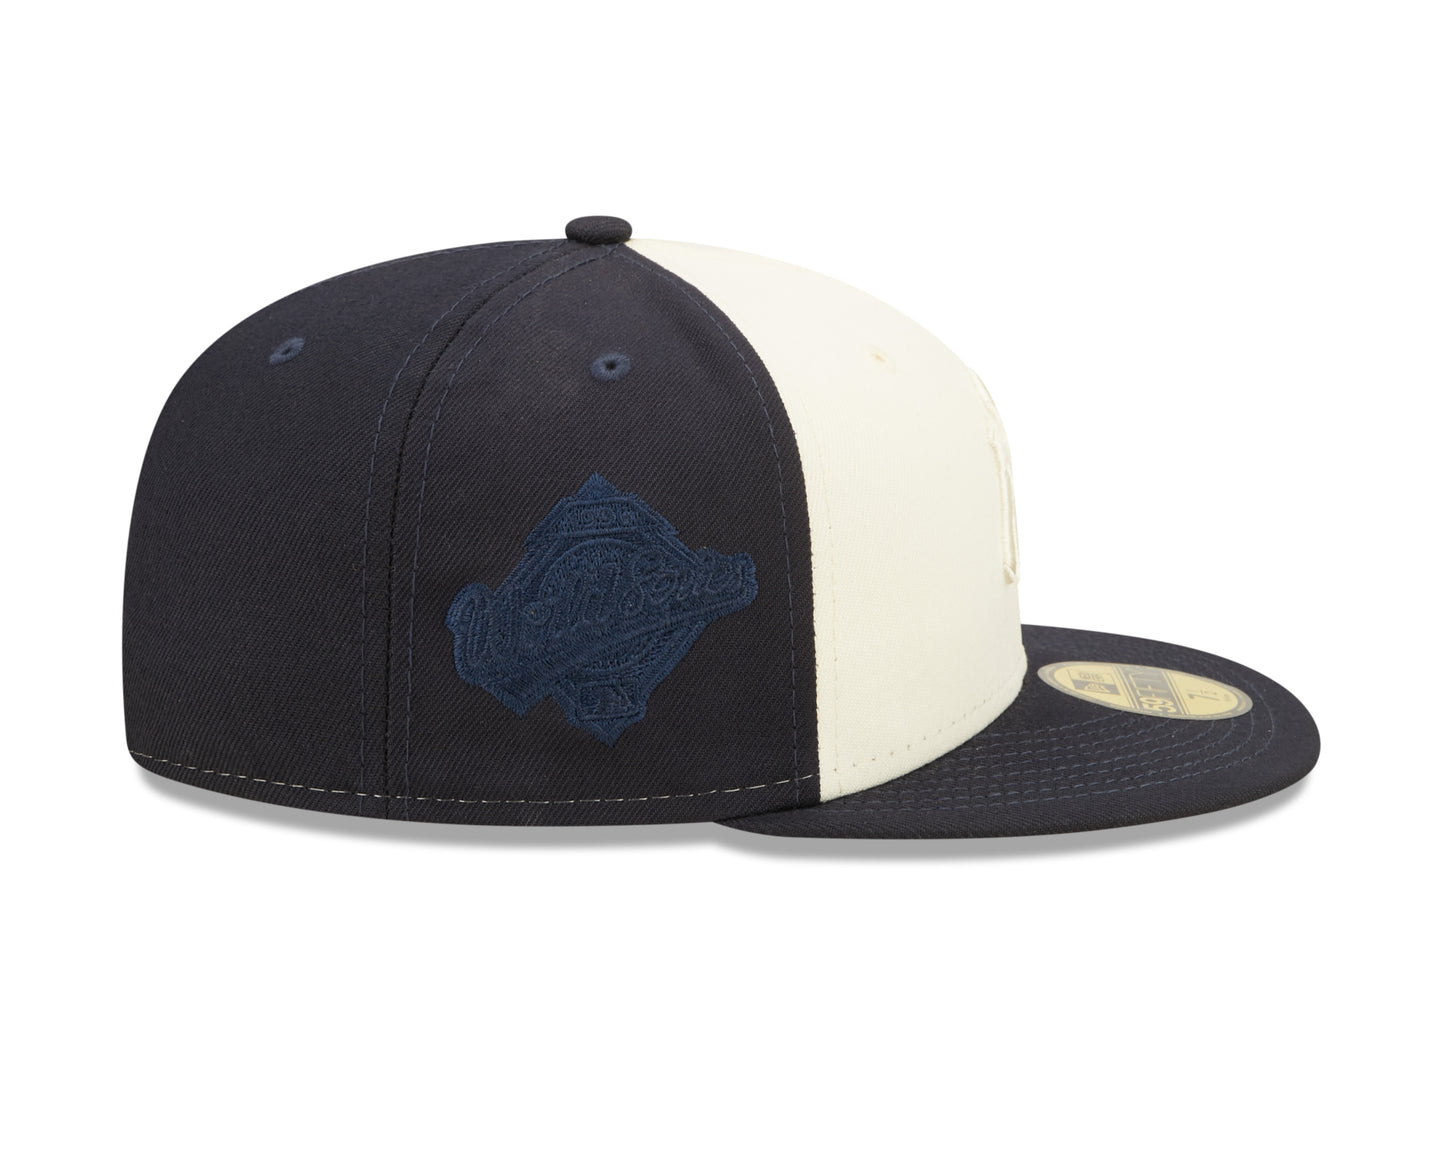 New York Yankees World Series Tonal 2-tone 59fifty Fitted Hat